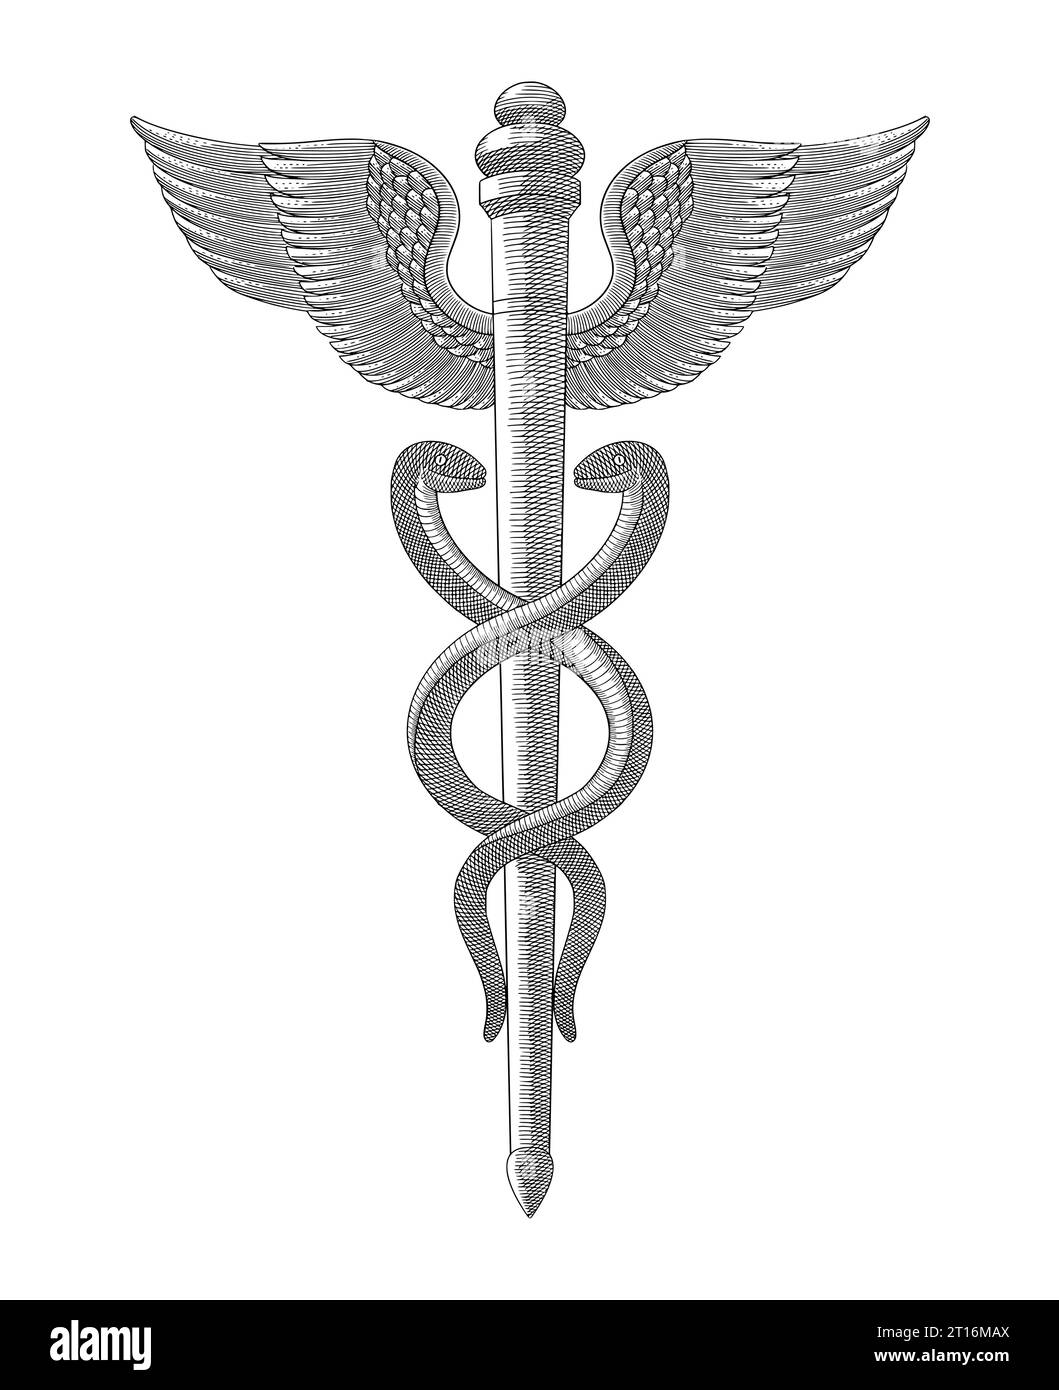 caduceus medical symbol, Vintage engraving drawing style vector illustration Stock Vector